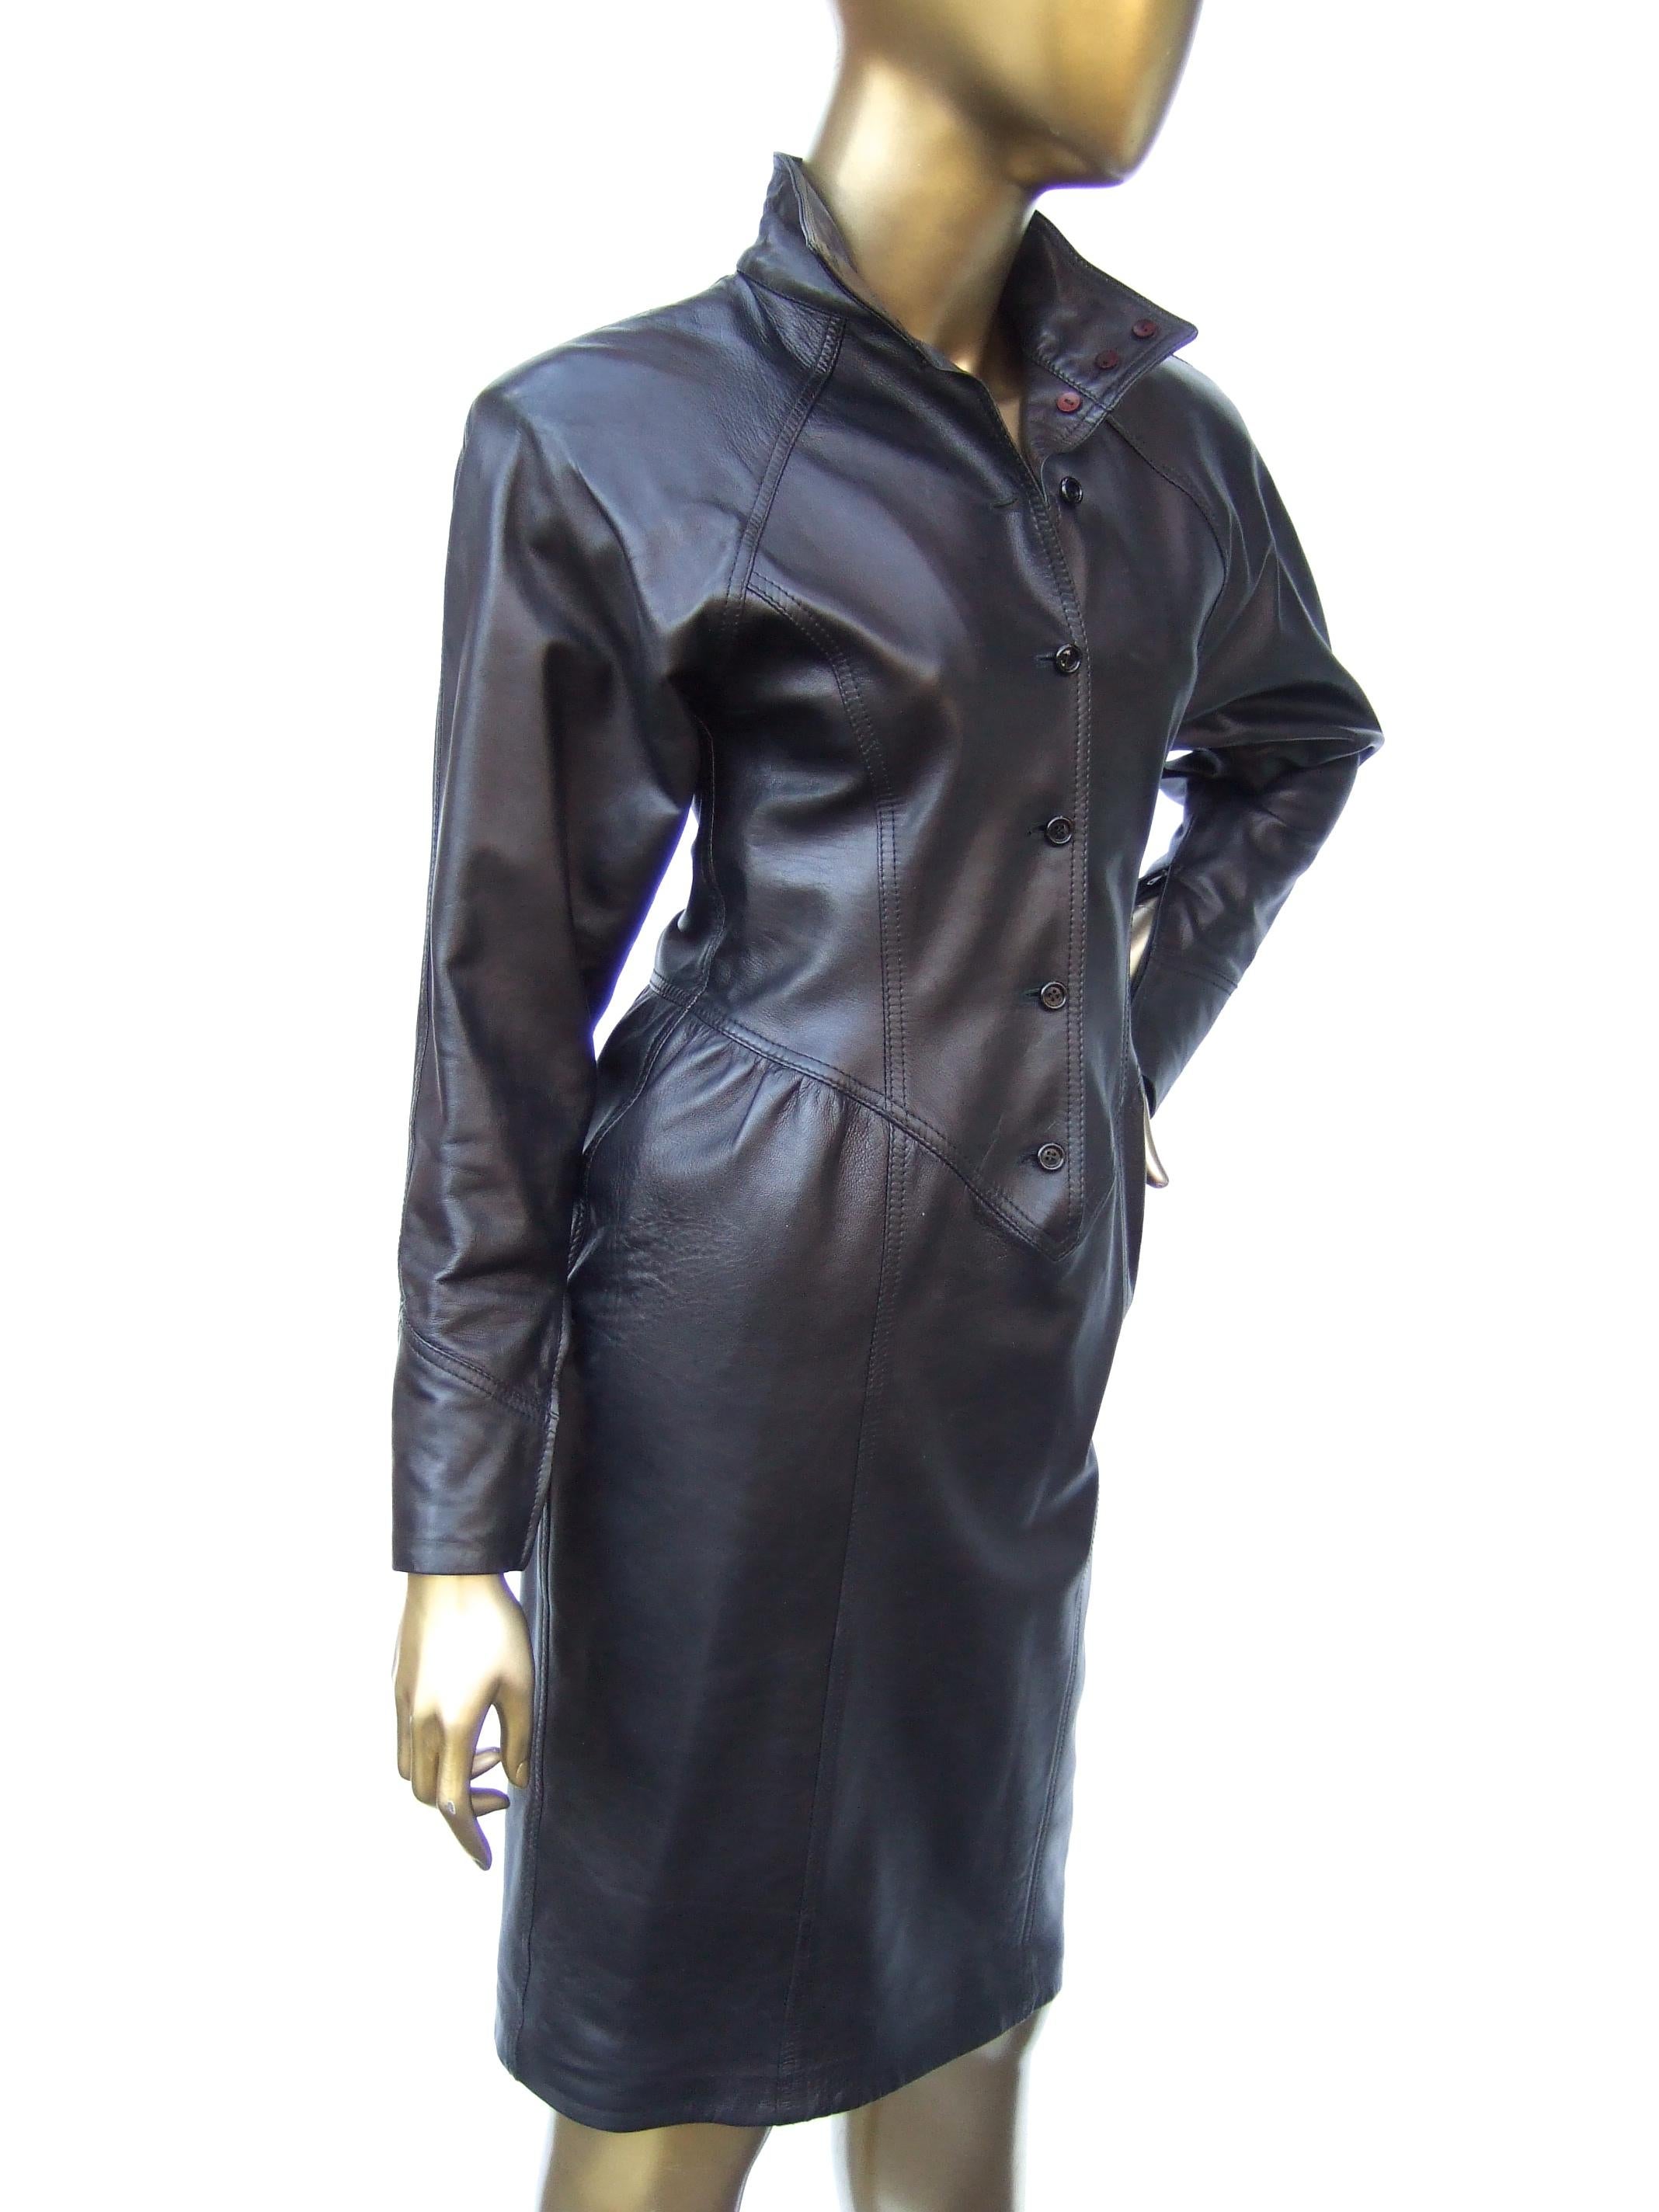 Emanuel Ungaro Paris Avant-garde Edgy Brown Leather Dress Made in Italy c 1980s For Sale 10